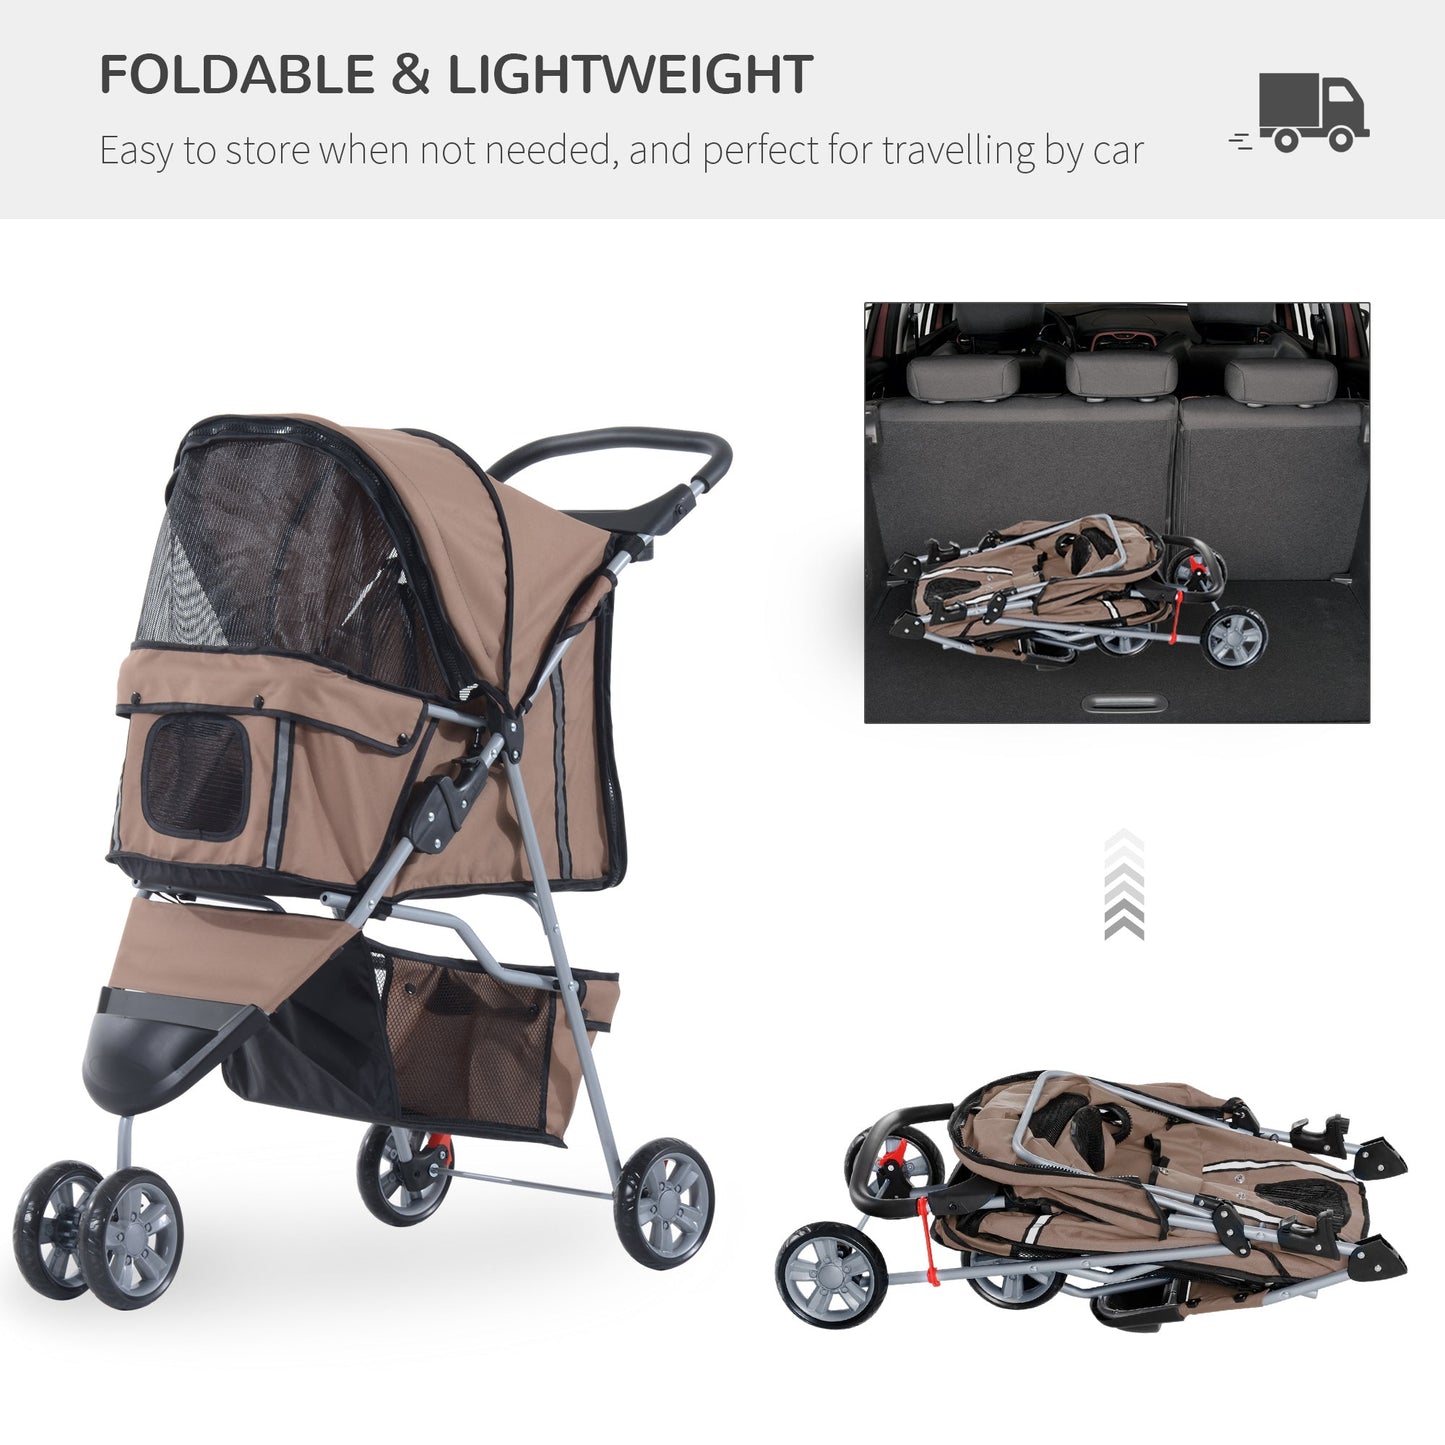 3 Wheel Folding Pet Stroller Dog Bike Carrier Strolling Jogger with Brake, Canopy, Cup Holders and Bottom Storage Space, Coffee at Gallery Canada